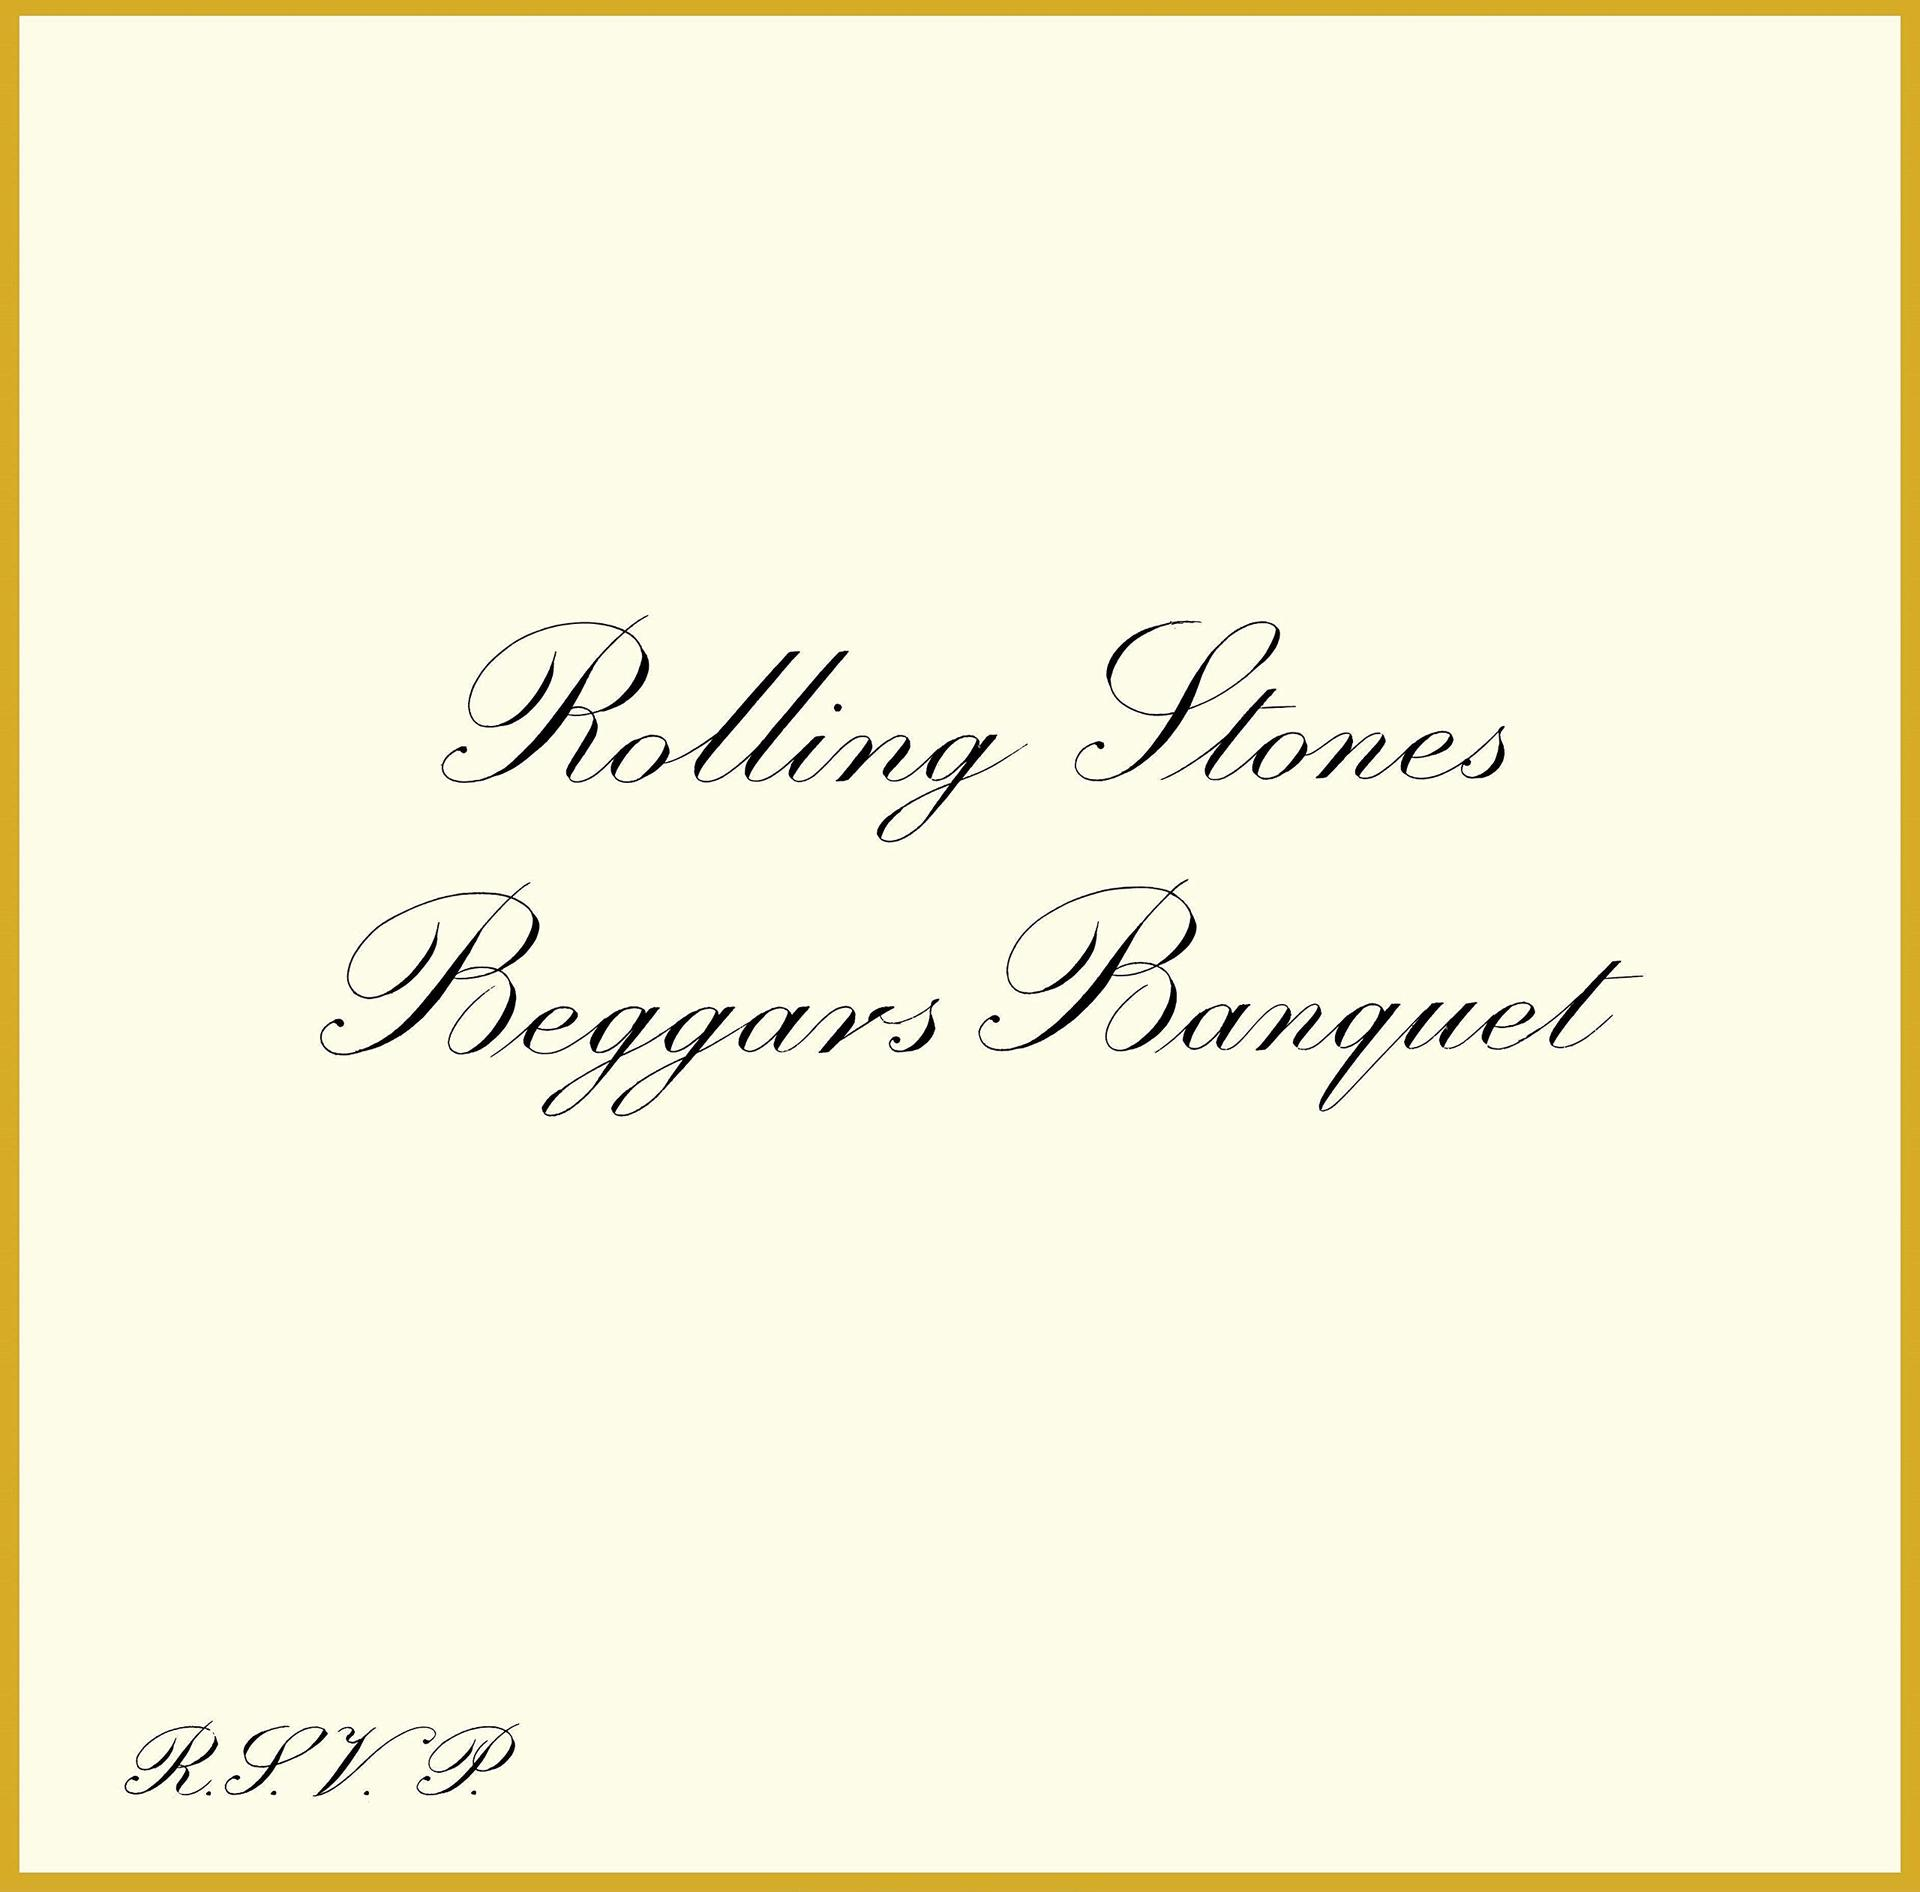 Banquet The Rolling Edition Beggars Stones Anniversary (CD) - 50th -